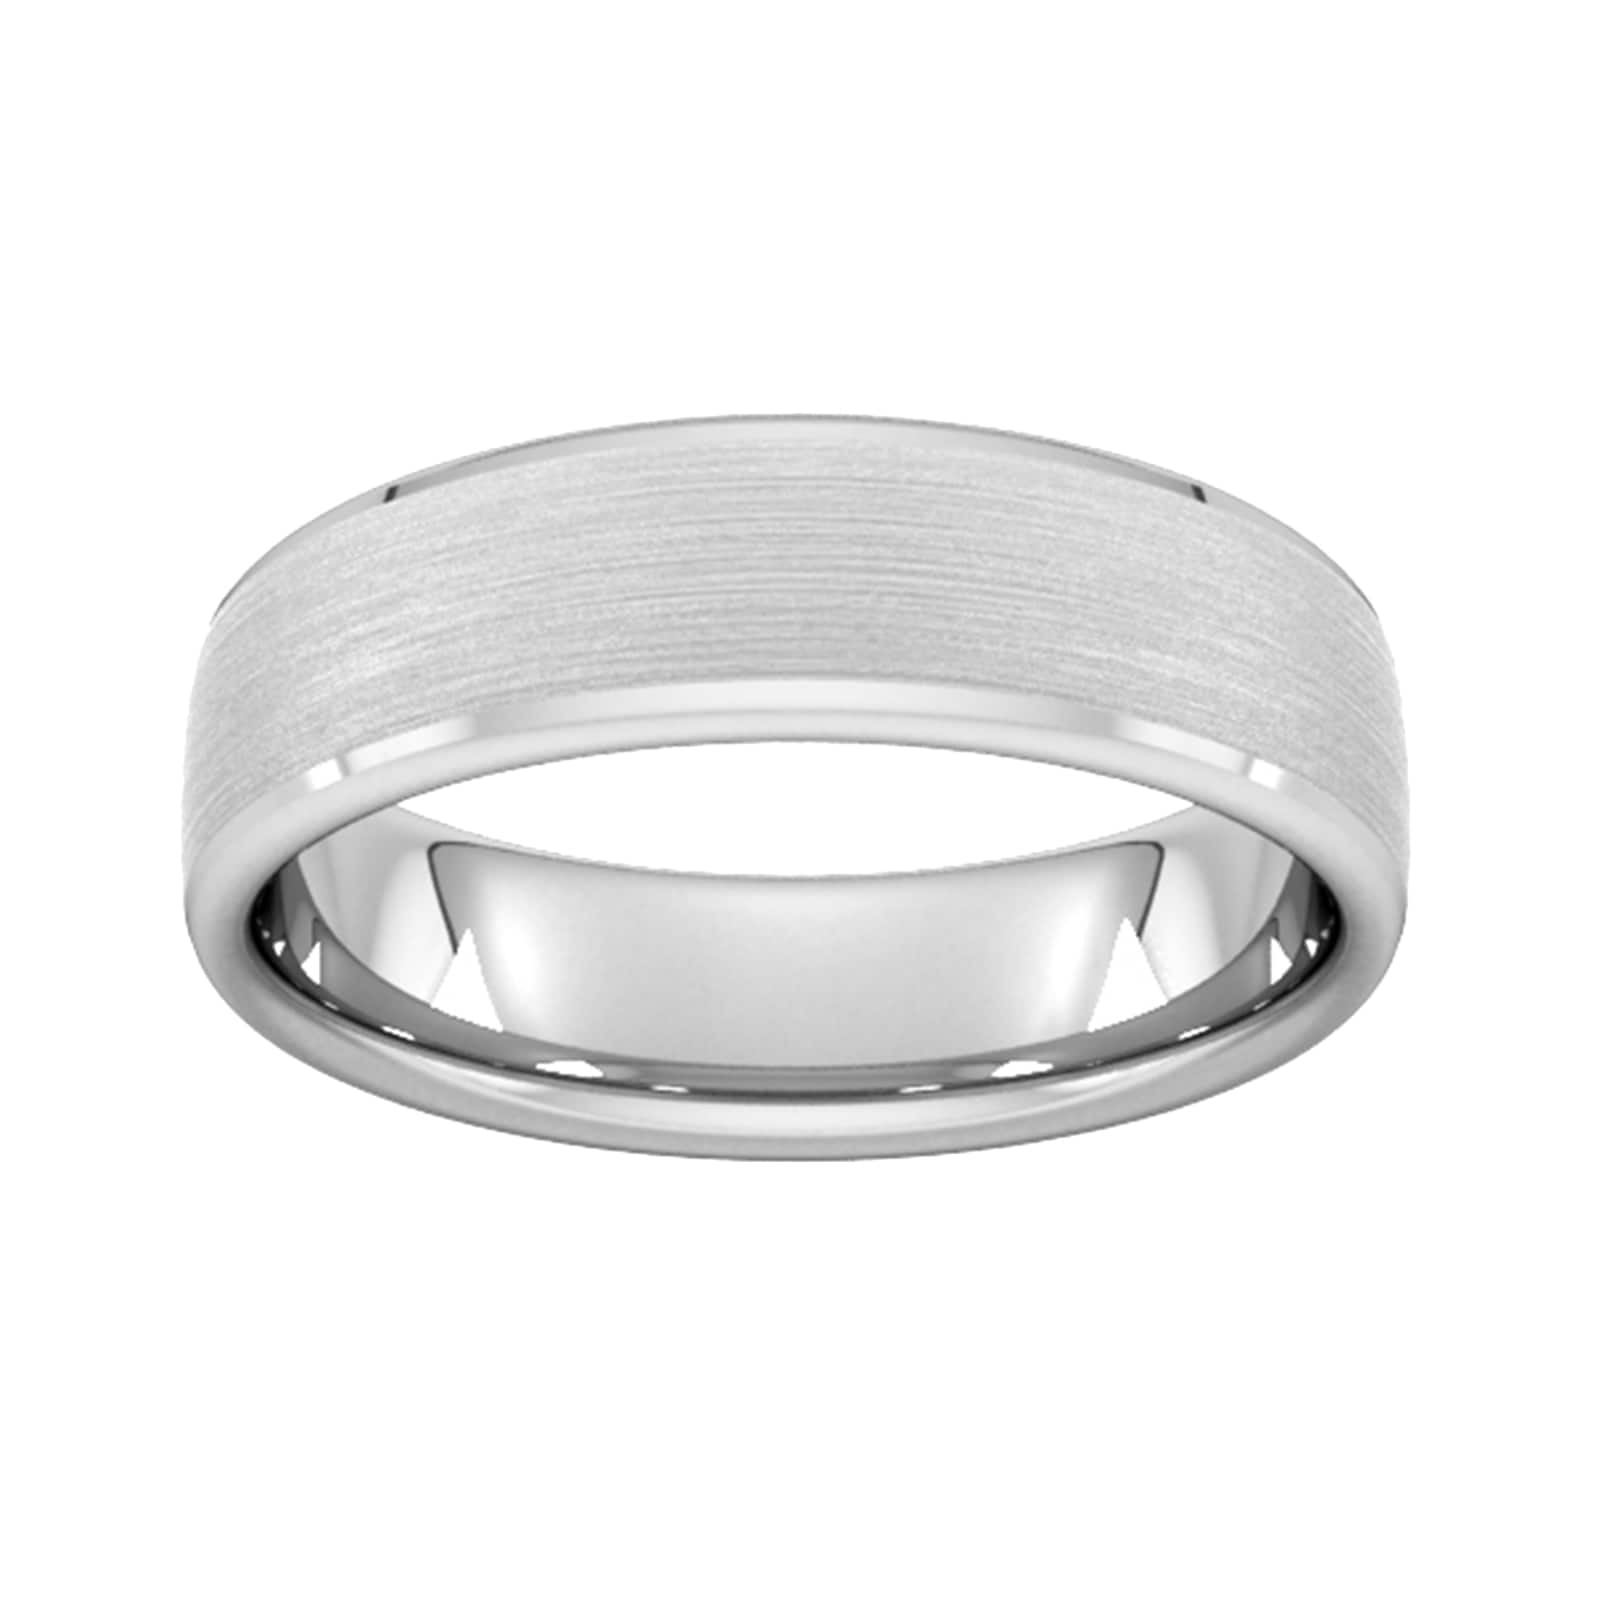 Smooch - Wedding Rings by Appointment - Palladium Laser Engraved Court  Shape Wedding Ring: https://www.smoochrings.co.uk/rings/810/palladium -laser-engraved-court-shape-wedding-ring/ | Facebook